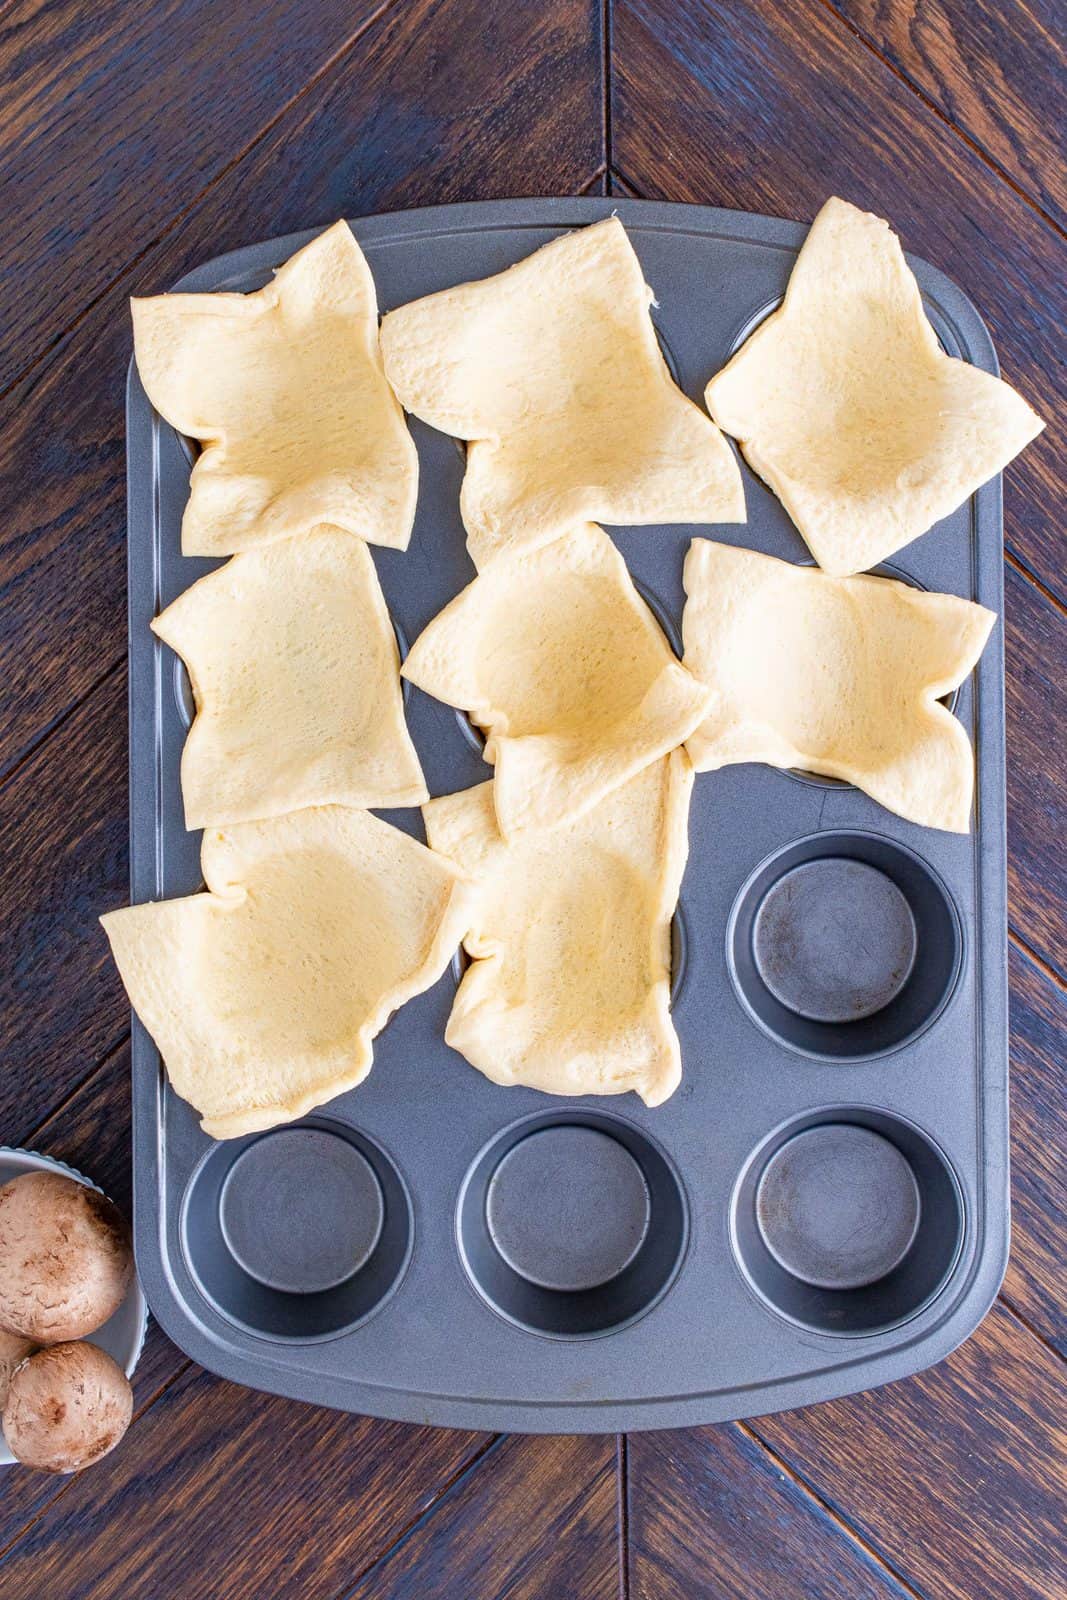 Cut up crescent dough sheet and placed into muffin tin.